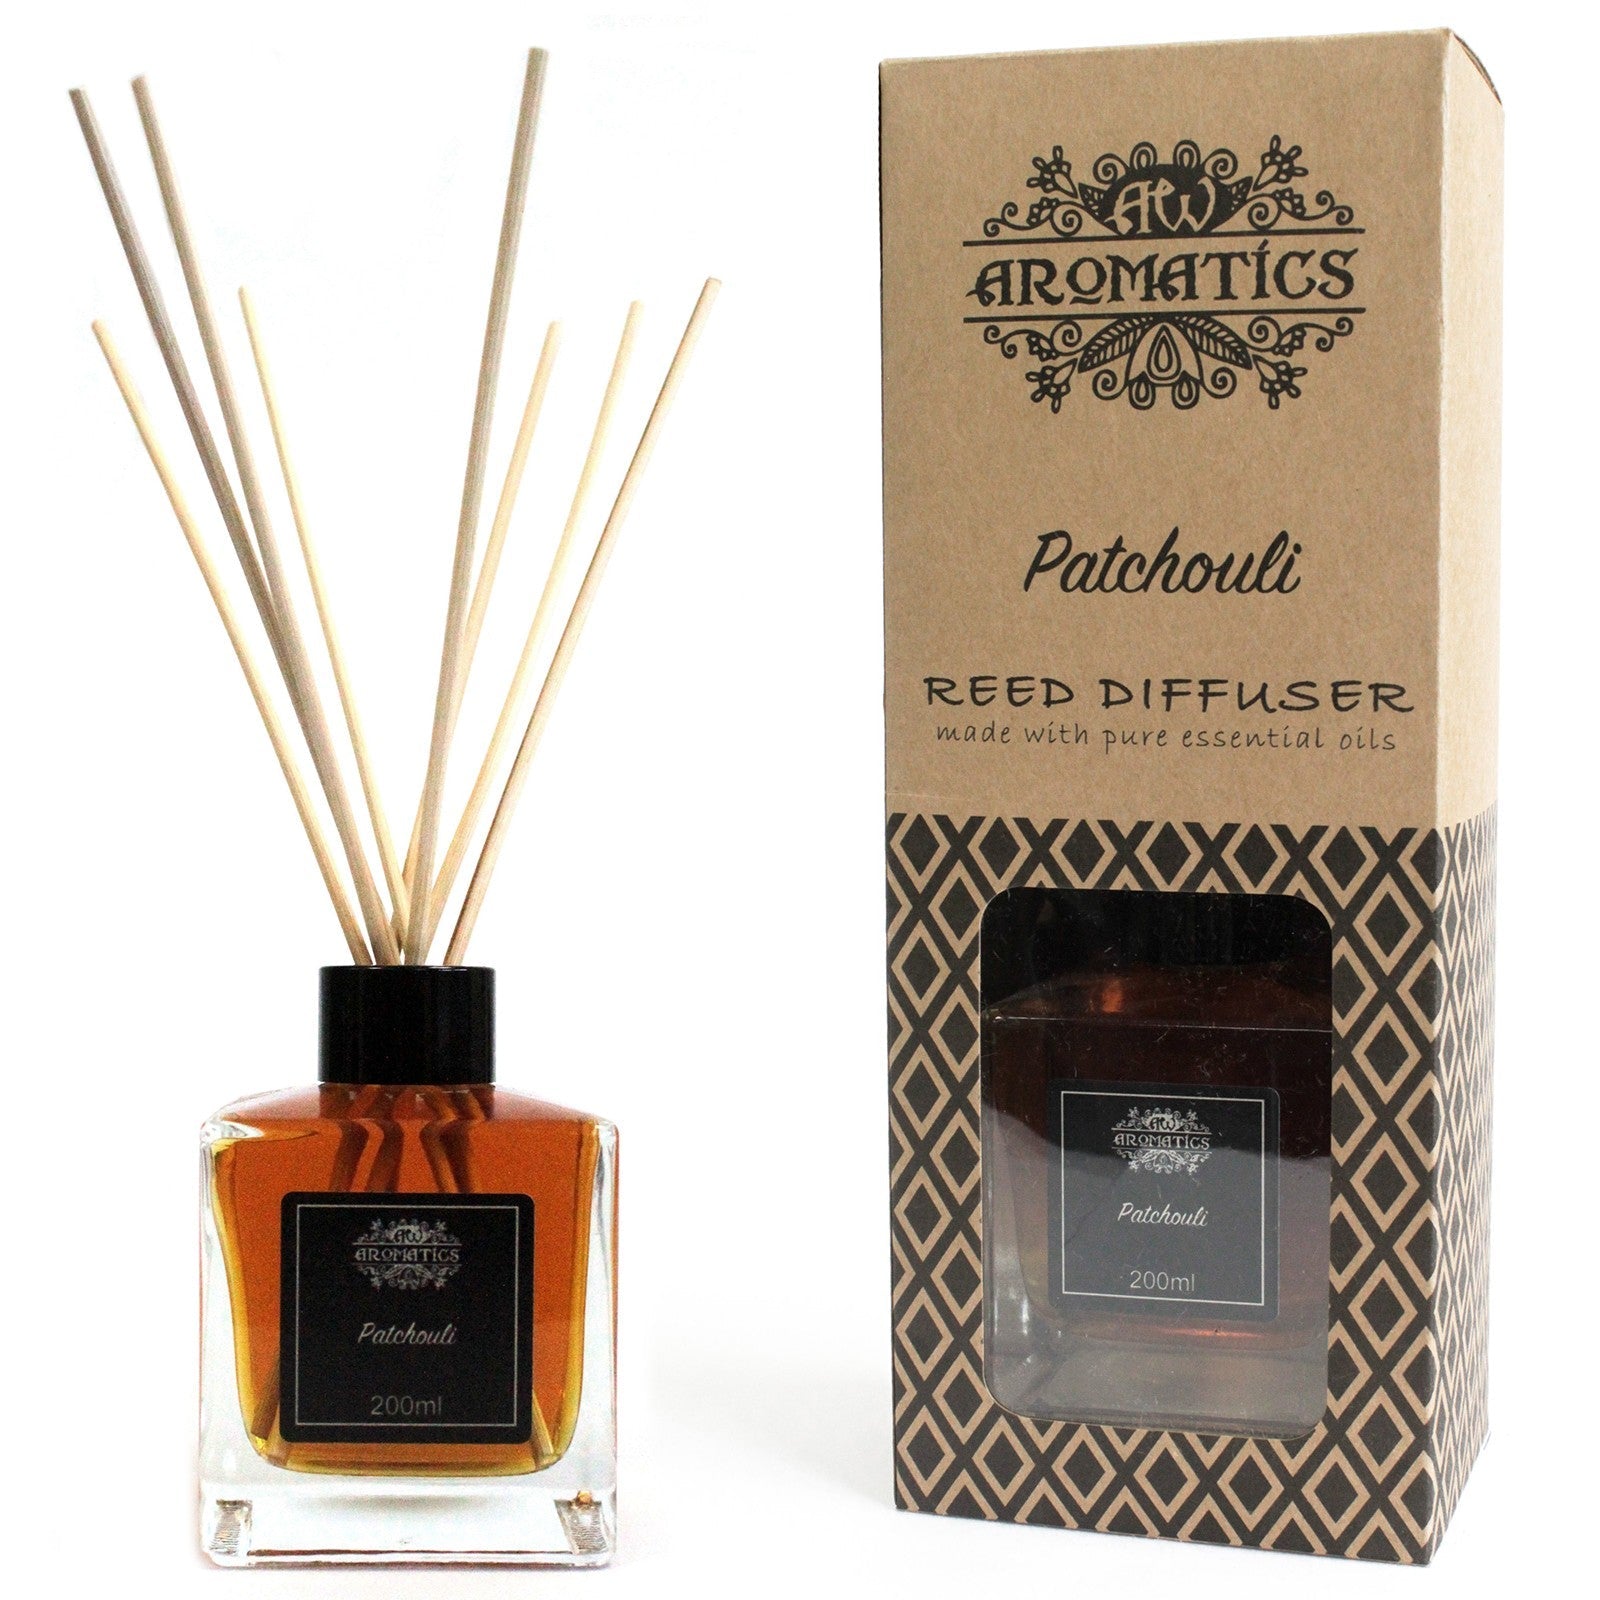 View 200ml Patchouli Essential Oil Reed Diffuser information